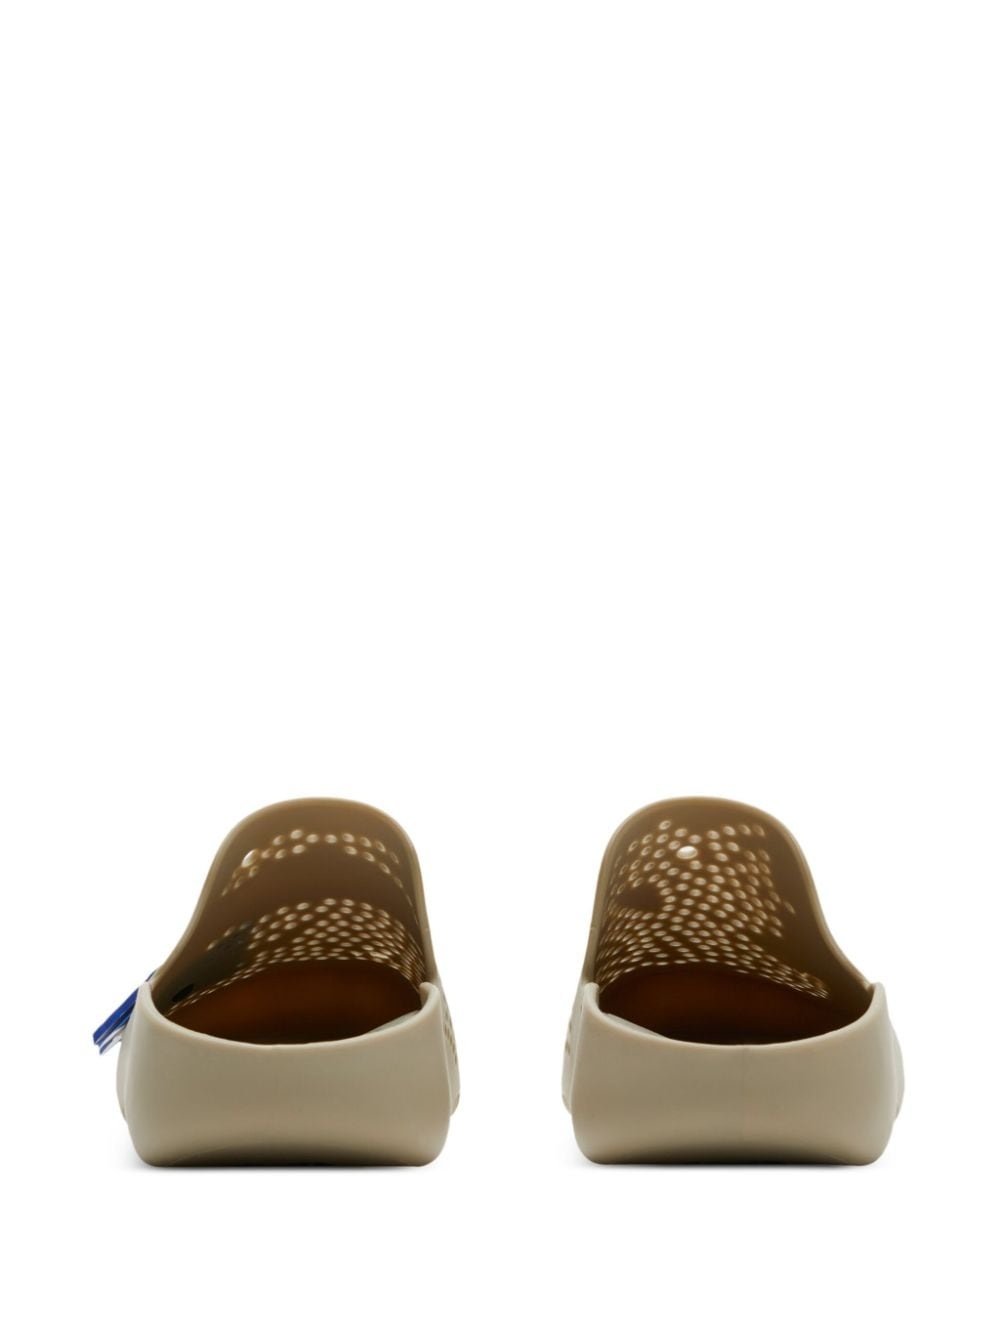 Stingray perforated clogs - 3